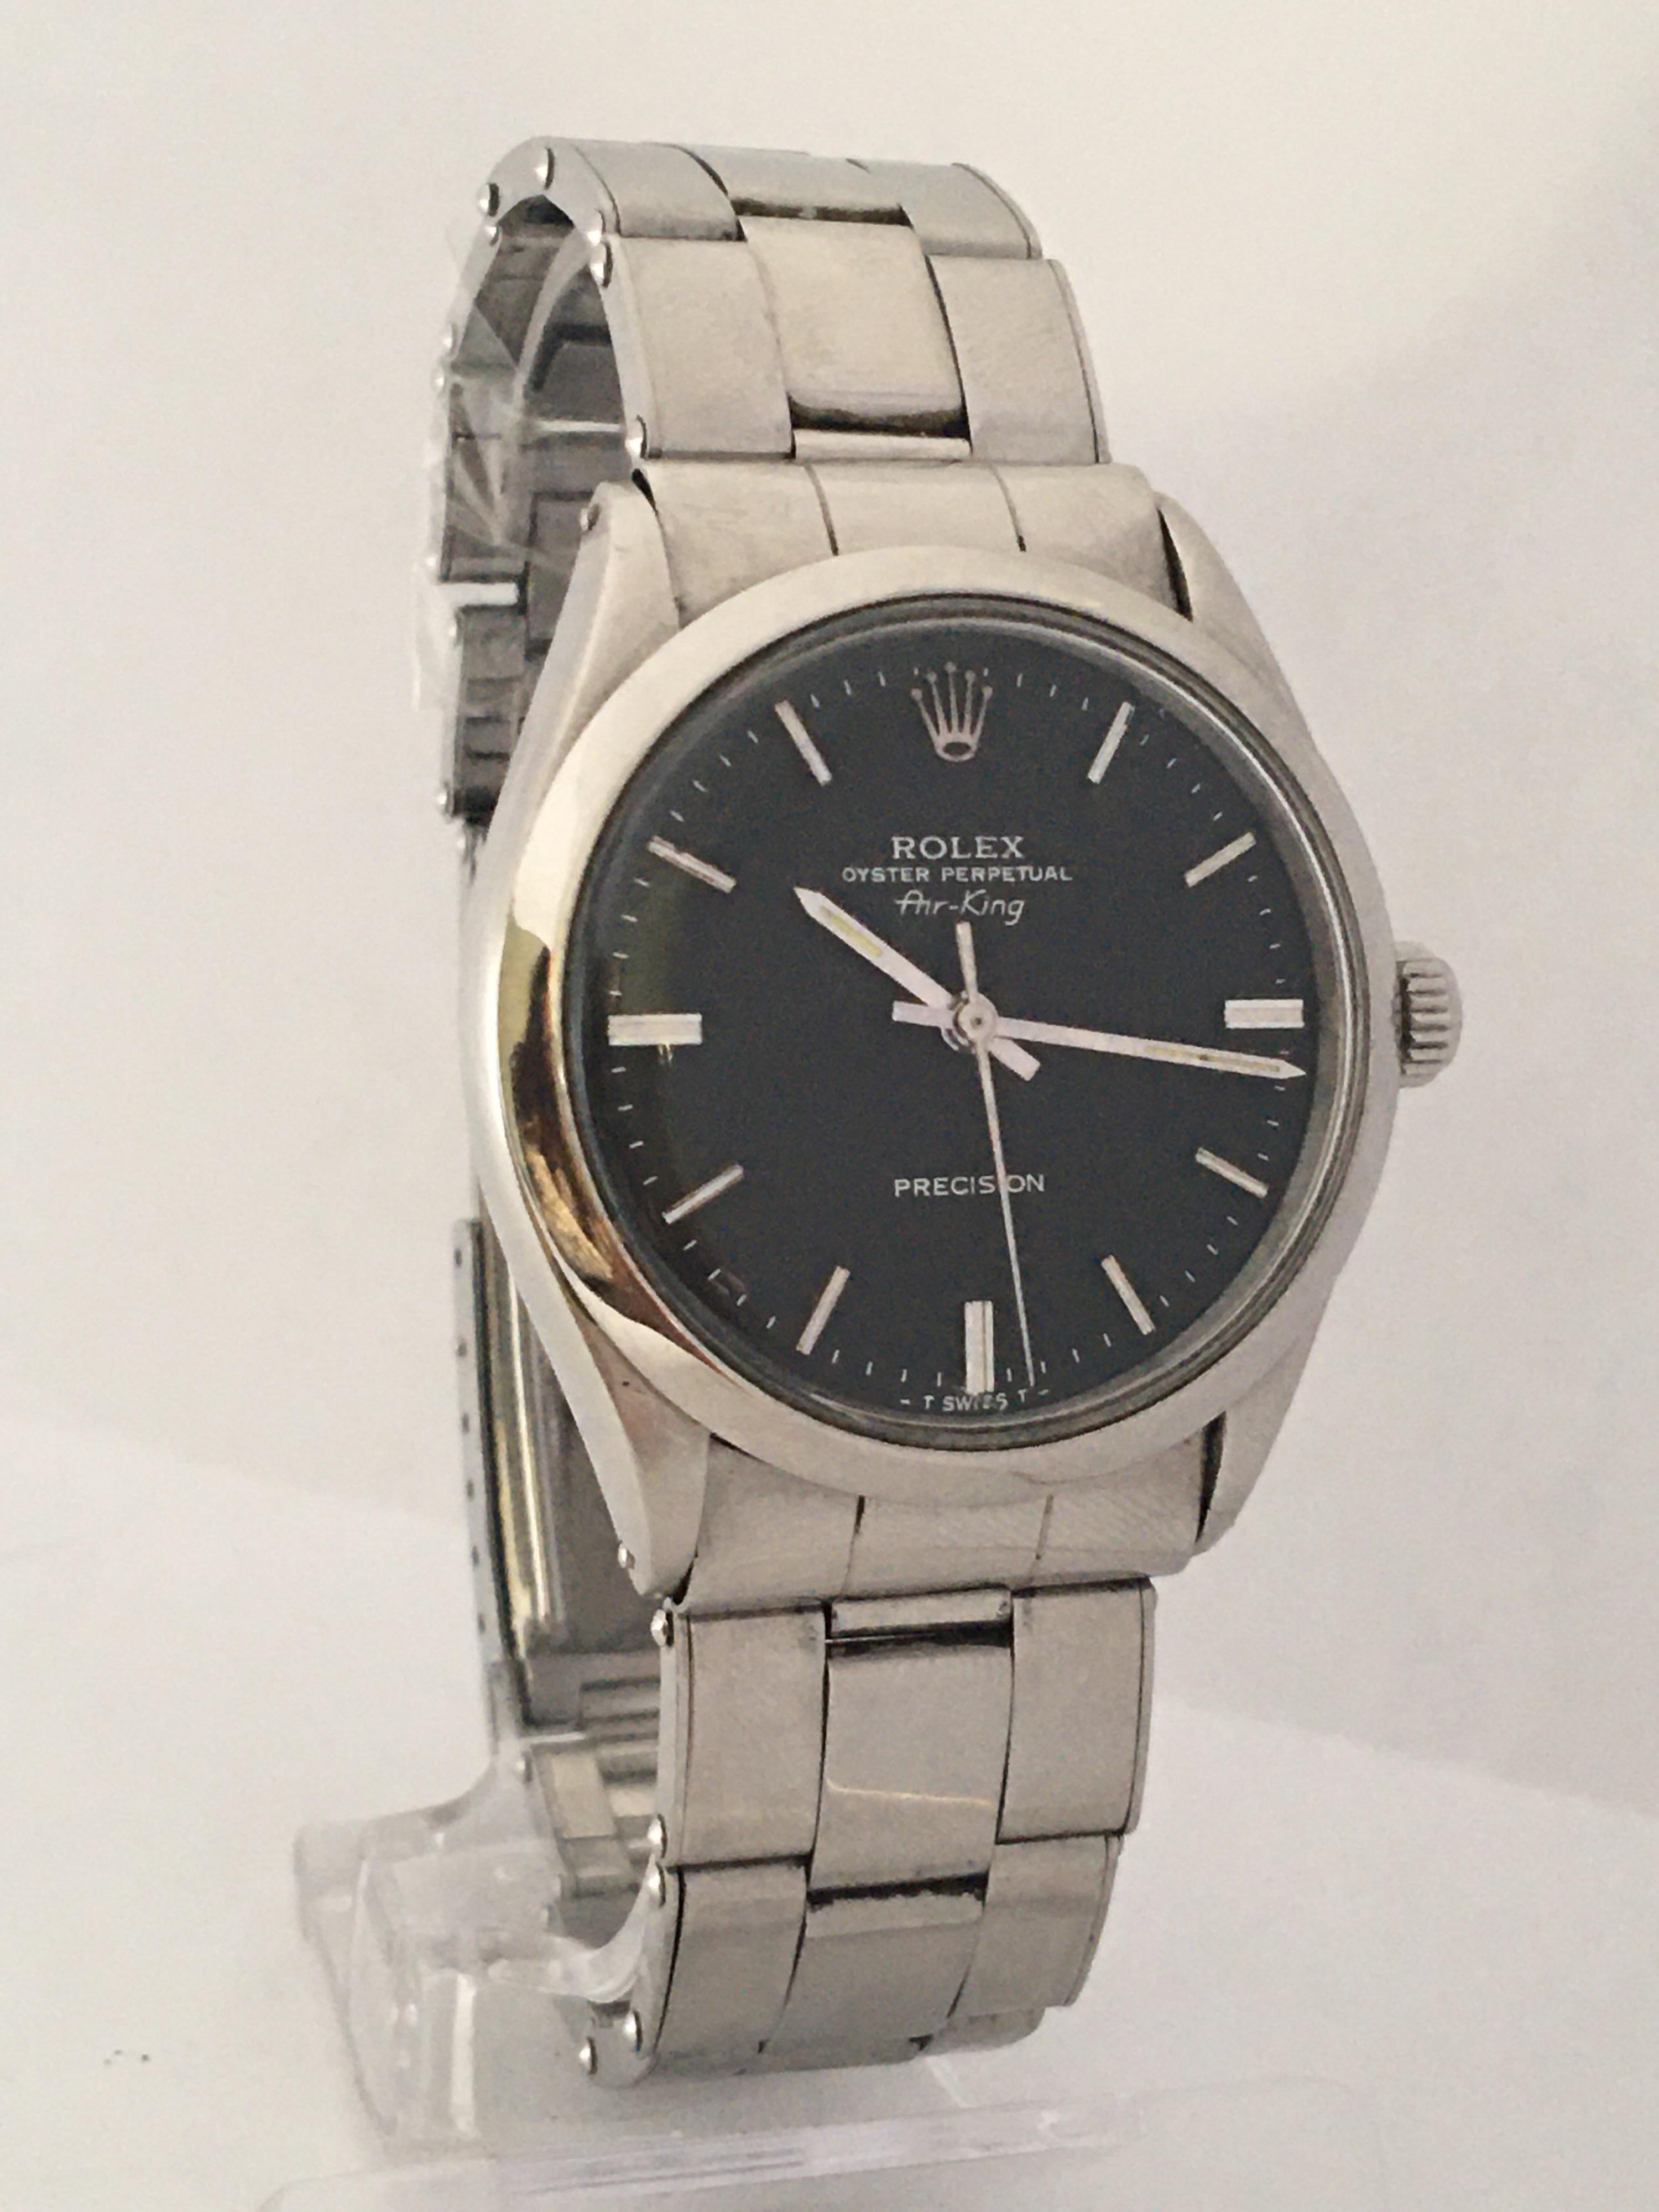 1960s SS Rolex Oyster Perpetual Air-King Precision, 1520 Mechanical Watch For Sale 5